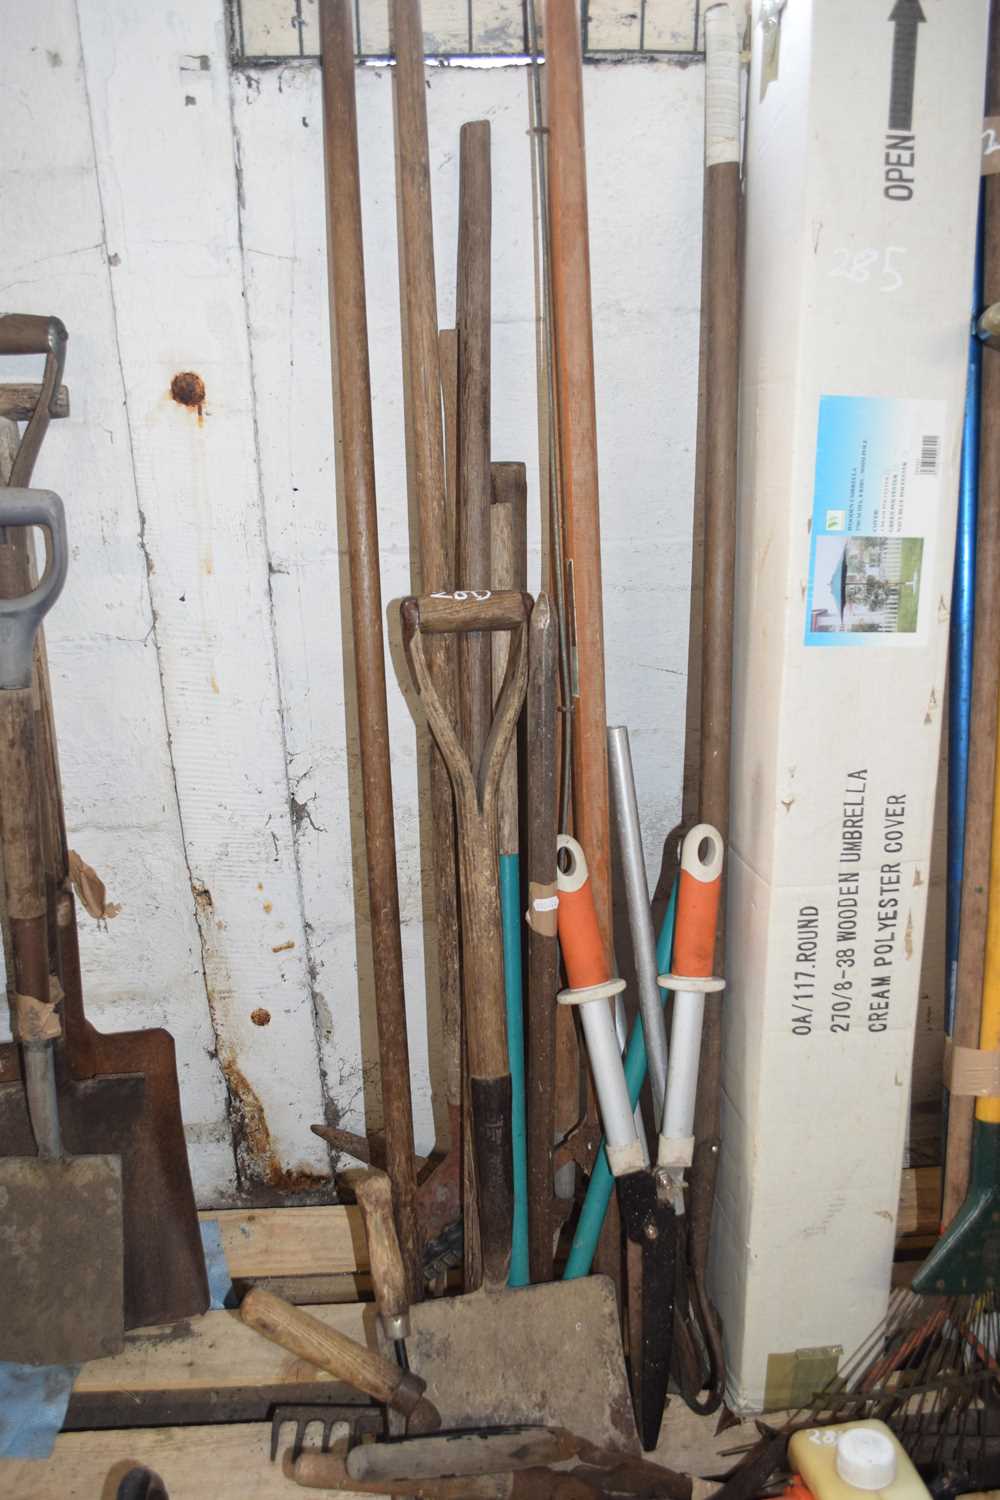 Large quantity of various garden tools to include spades, hedge cutters, loppers etc